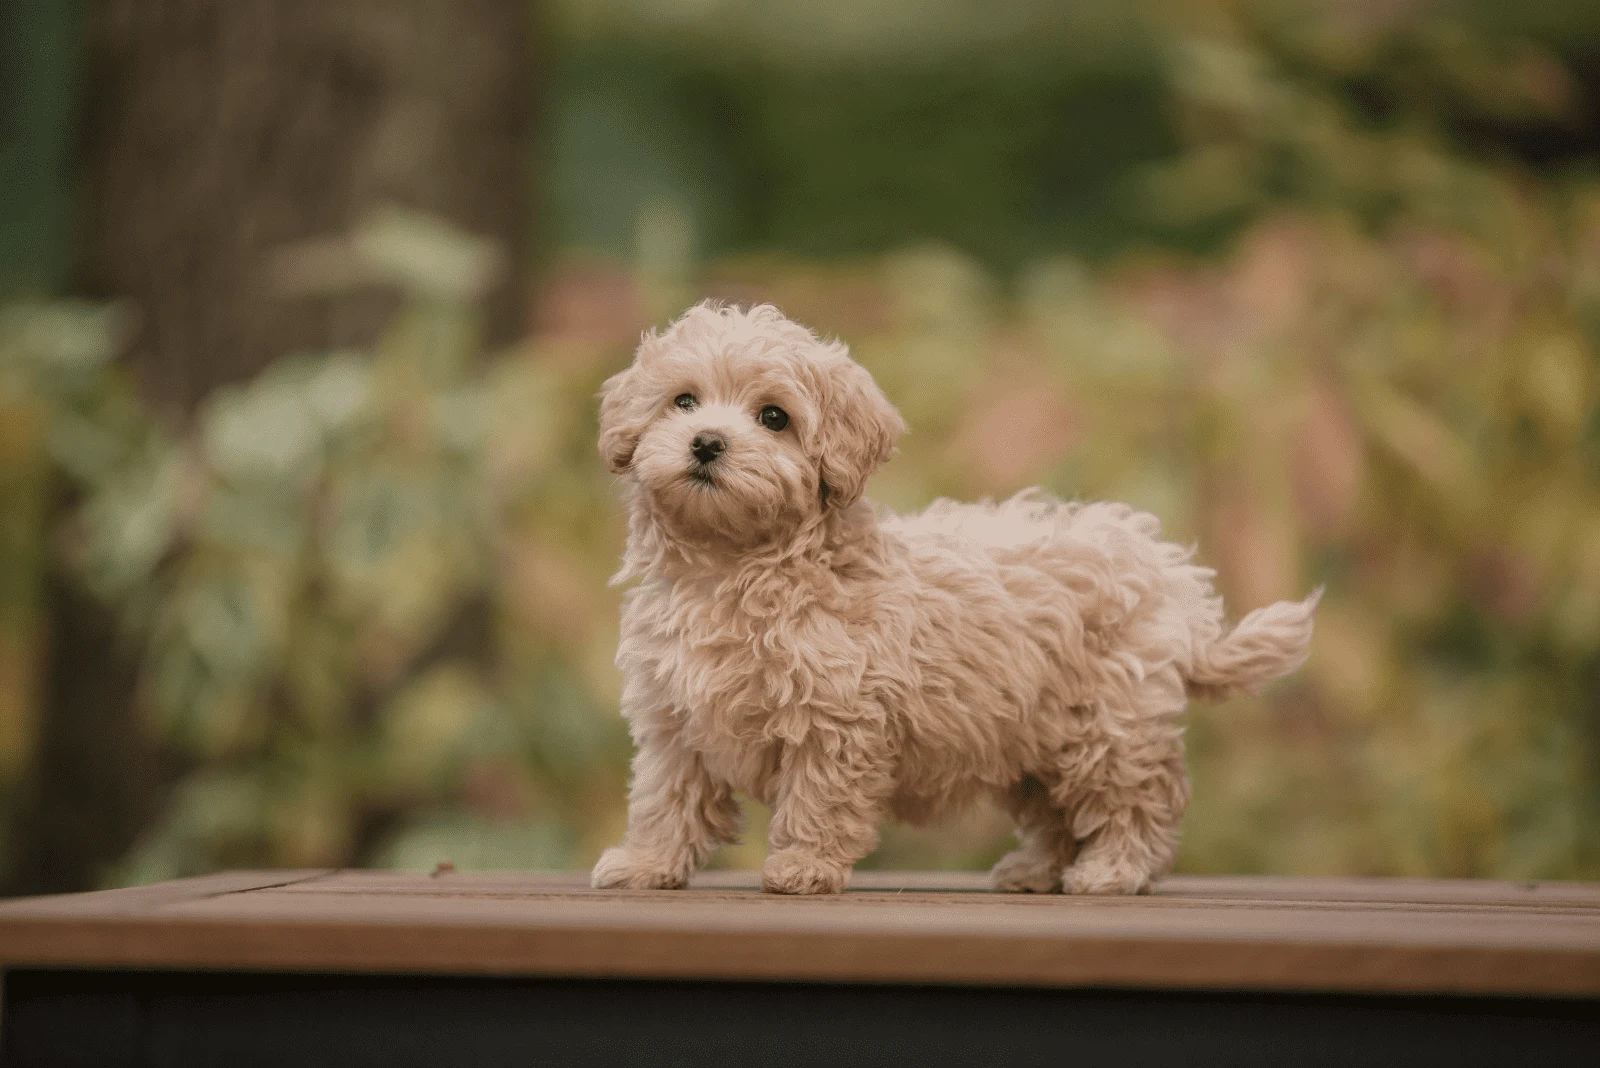 the adorable Maltipoo is standing on a wooden base